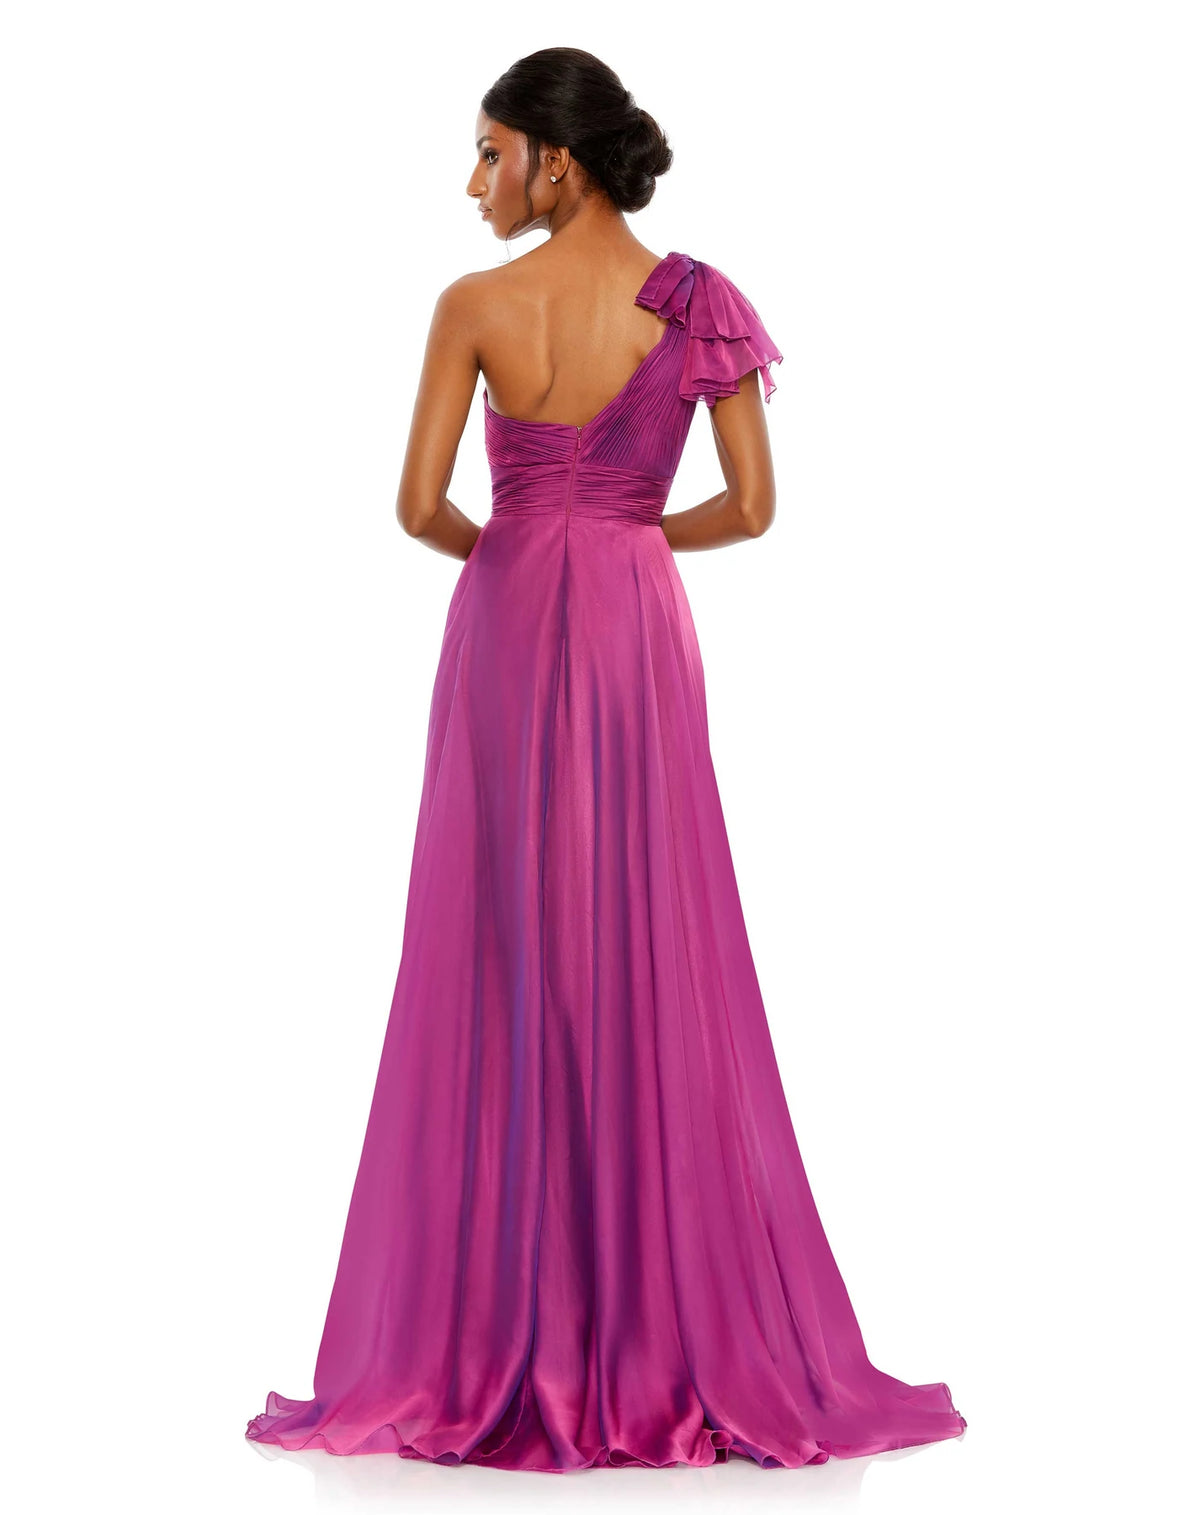 This elegant Mac Duggal one-sleeved raspberry, dress is a stunning formal gown for special occasions. With beautiful draped asymmetric detail across one shoulder and an empire bust together with a flower skirt, this elegant gown will truly have you feeling like the belle of the ball back view